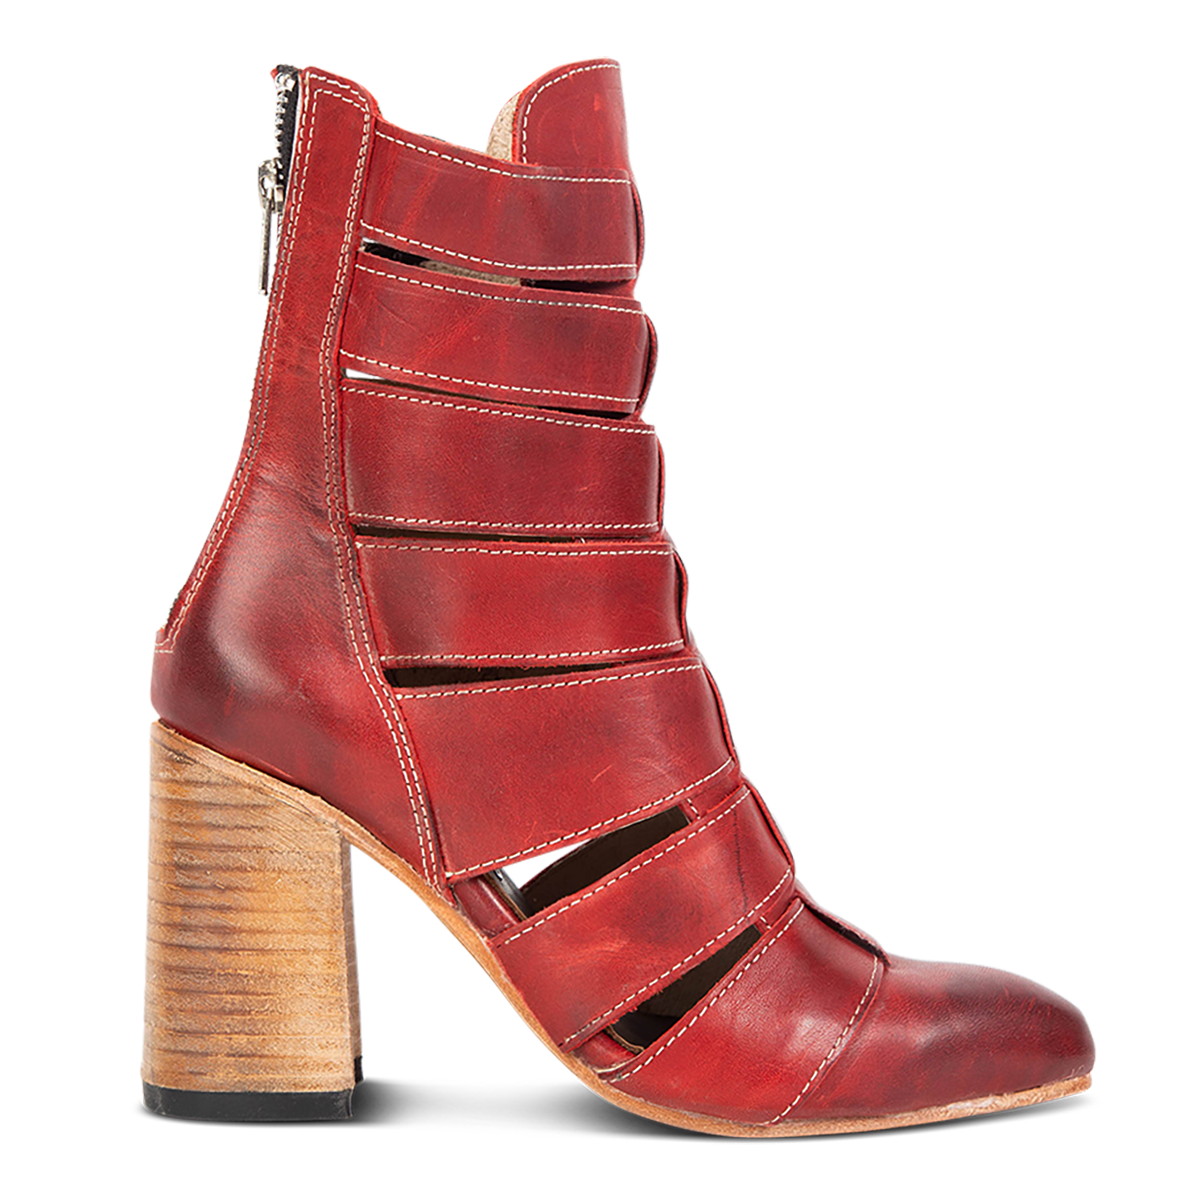 FREEBIRD women's Jagger red leather bootie with flare heel and pointed toe